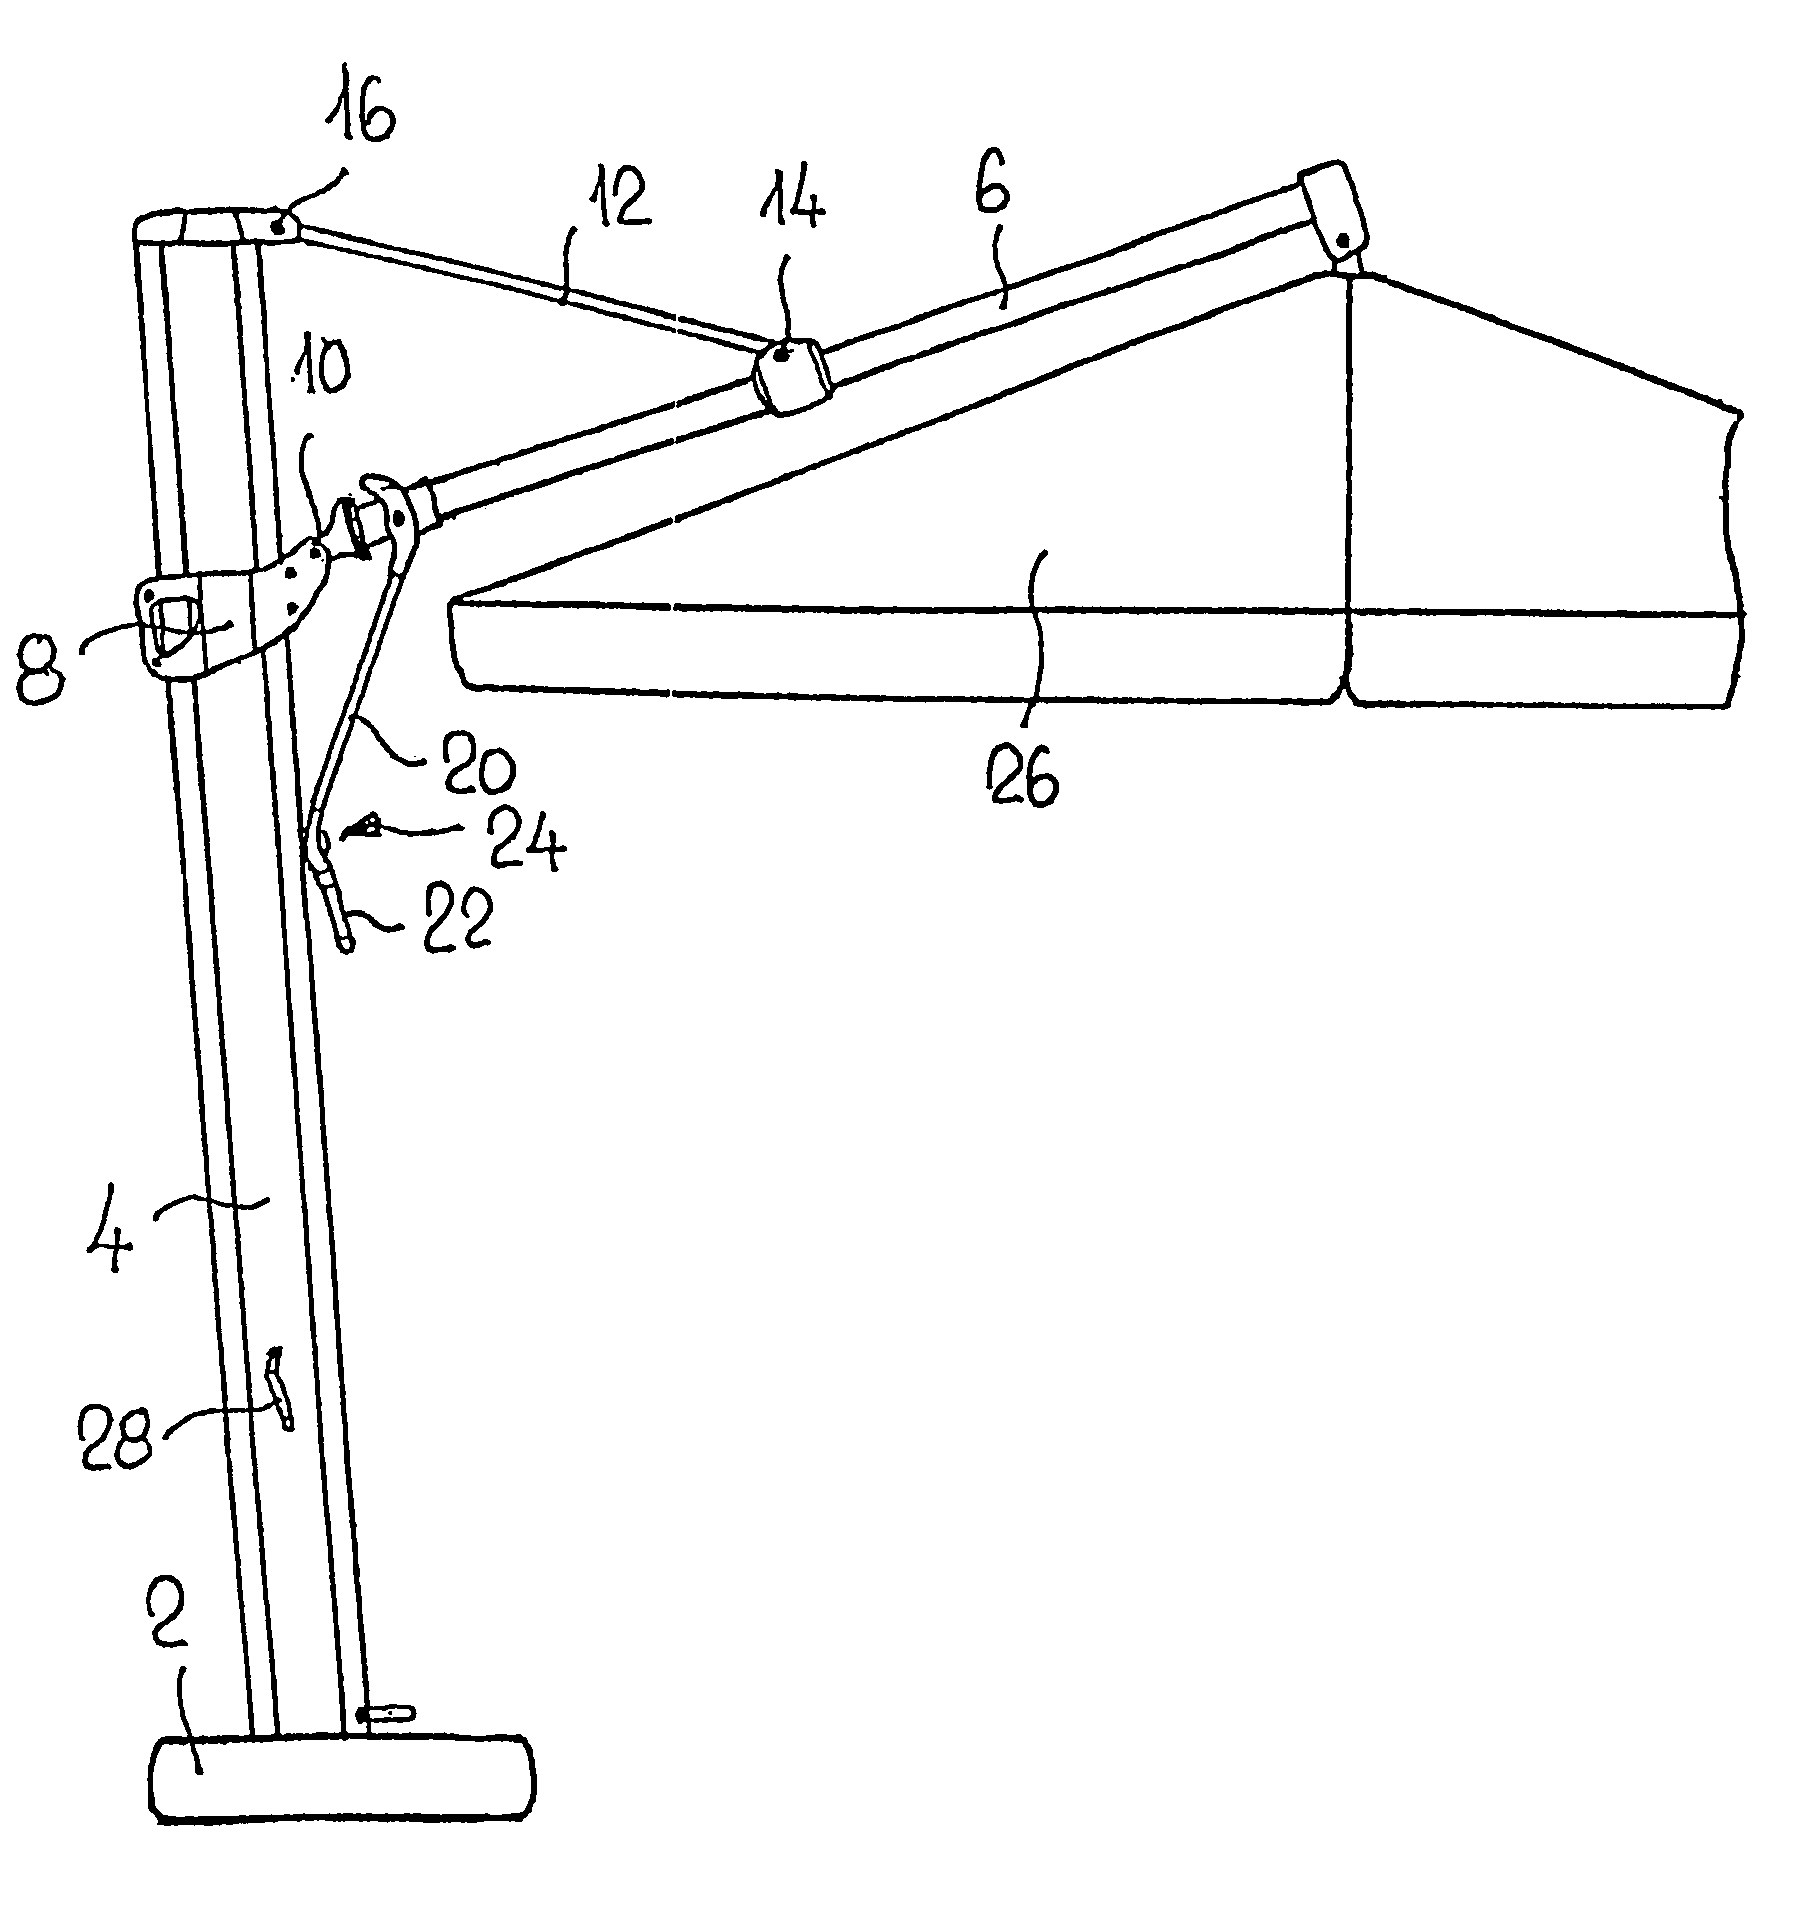 Extension arm for a free arm parasol, pivotably arranged on a carrier